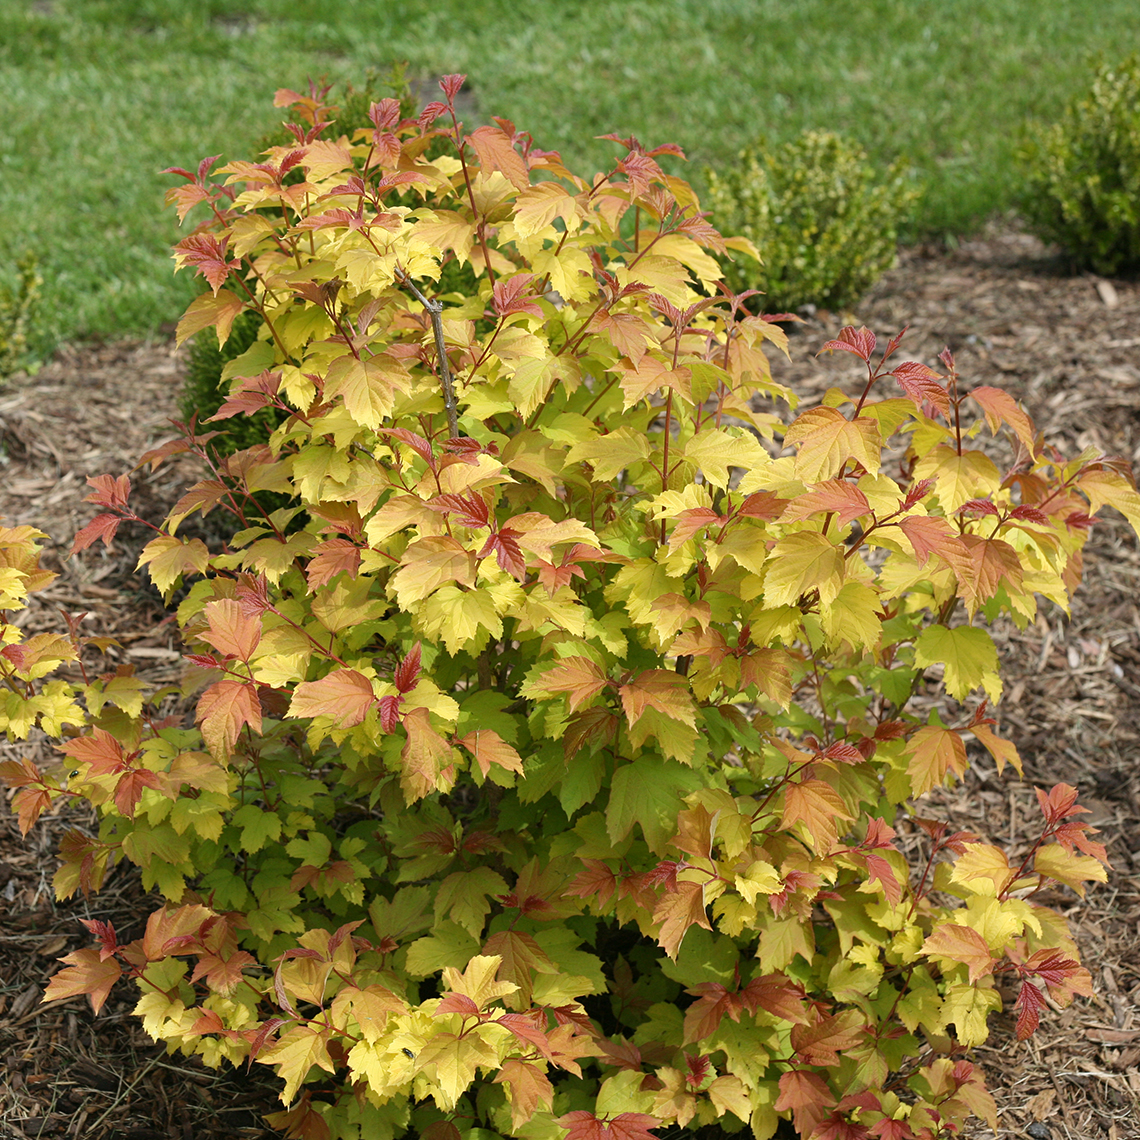 Oh Canada viburnum in a landscape displaying yellow and orange foliage